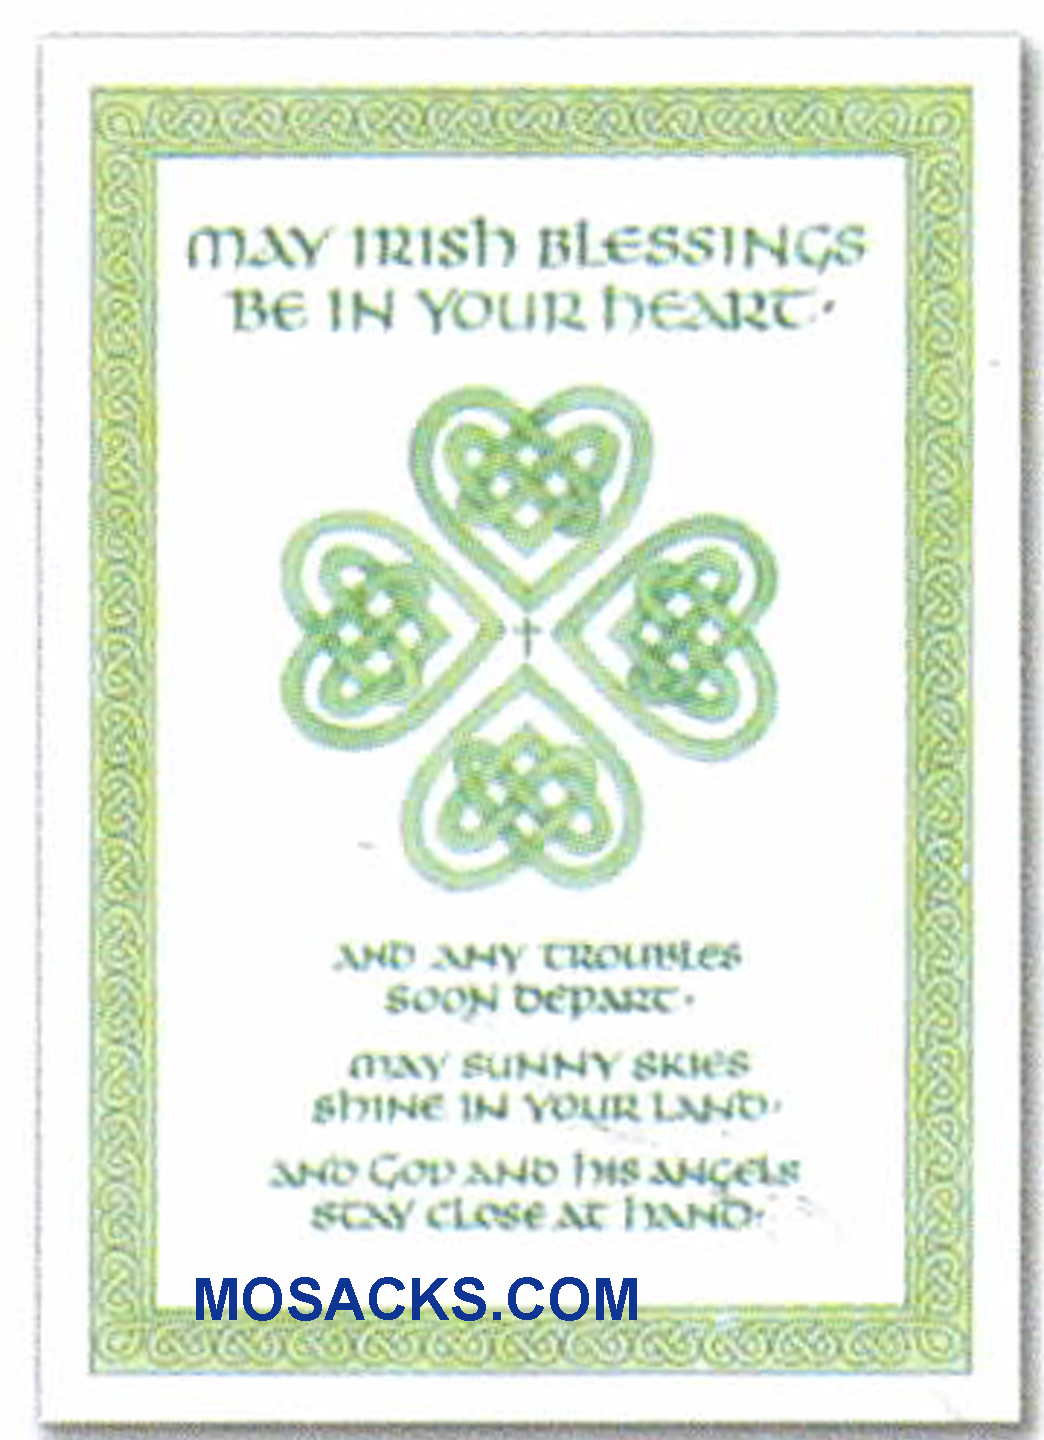 May Irish Blessings Be In Your Heart And Any Troubles Soon Depart-WCB1611 An Irish Blessings Note Card -WCB1611 